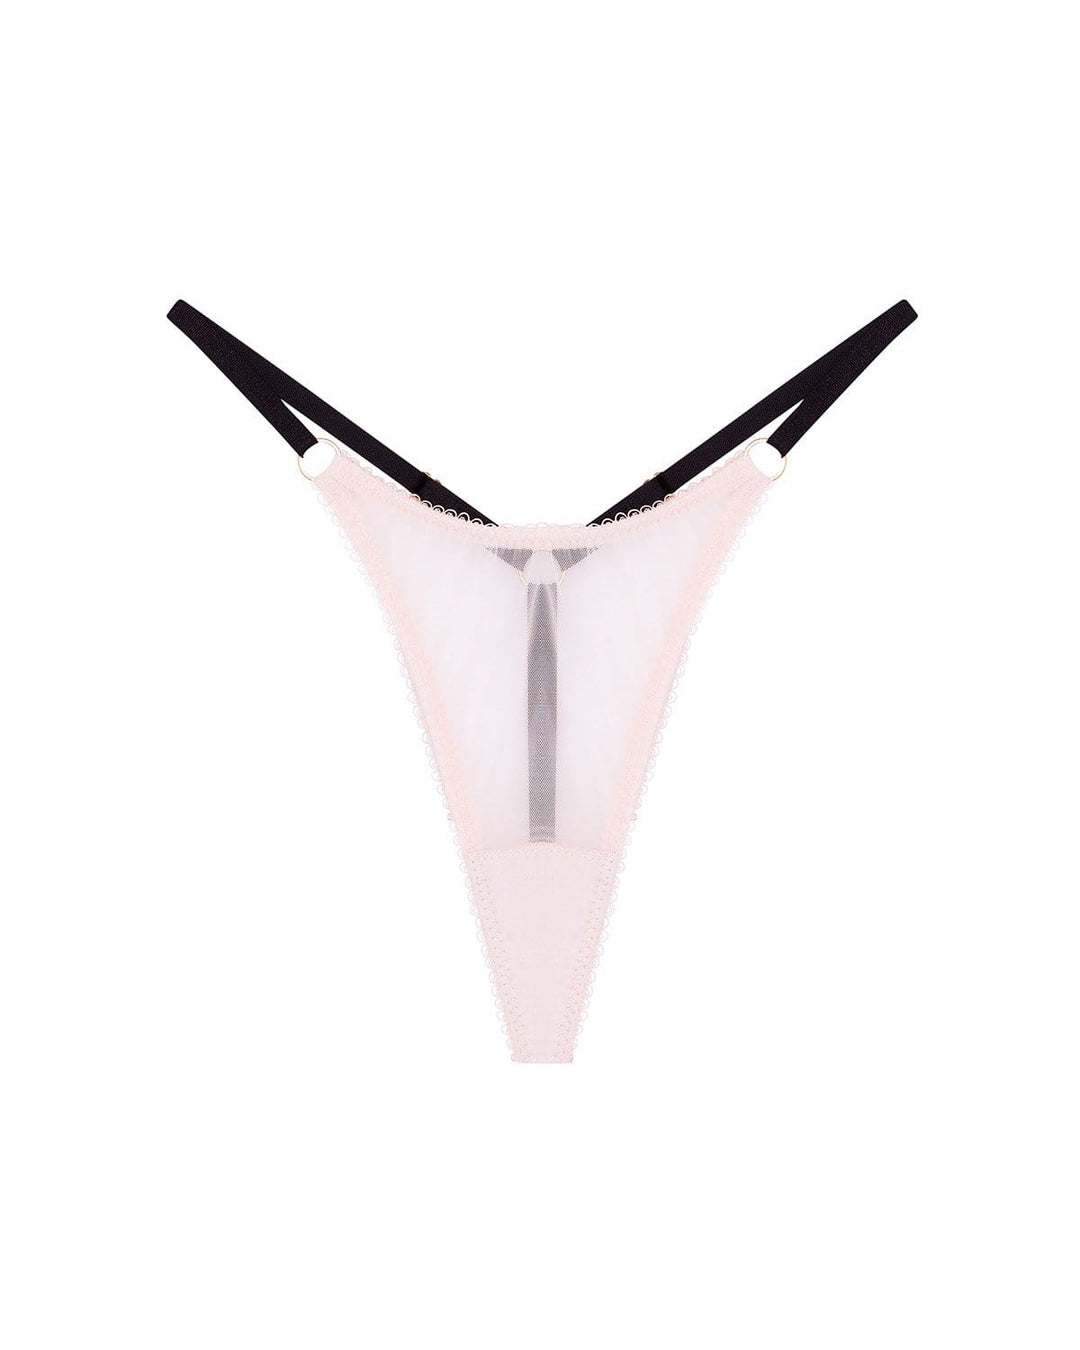 Vivi Leigh London lingerie Blush Pink Mesh Strappy Thong sexy harness luxury lingerie uk sustainable brand